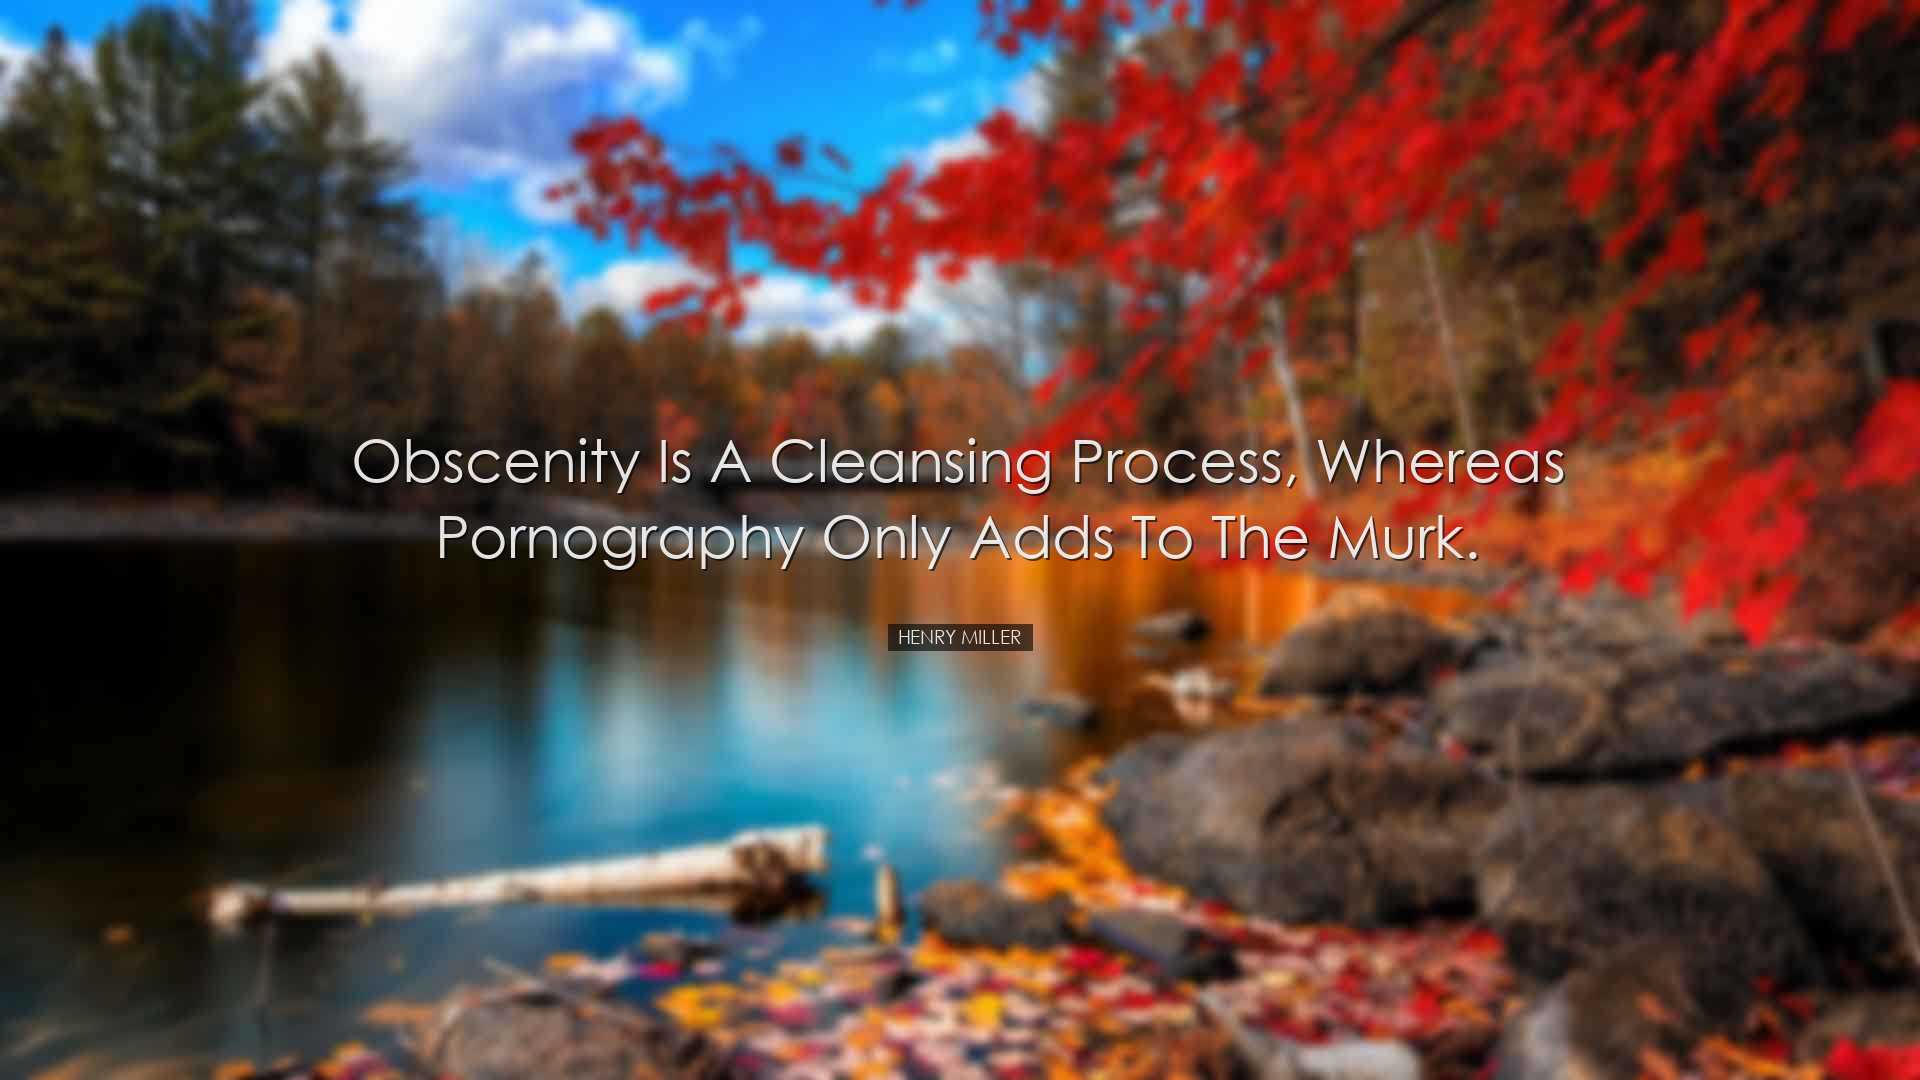 Obscenity is a cleansing process, whereas pornography only adds to